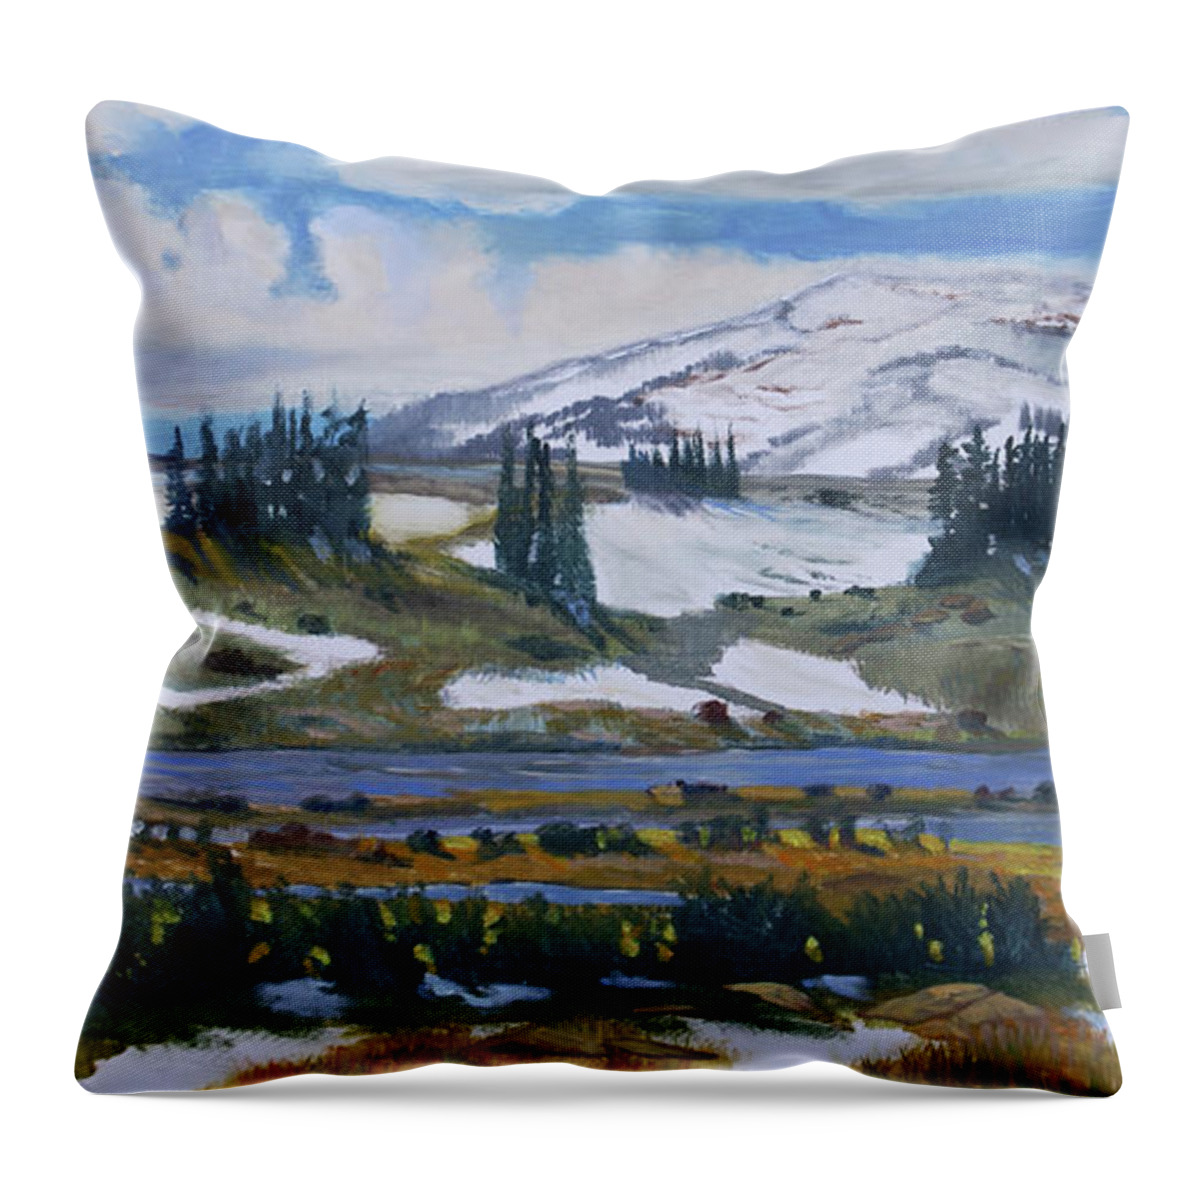  Throw Pillow featuring the painting Passing Light by Heather Coen